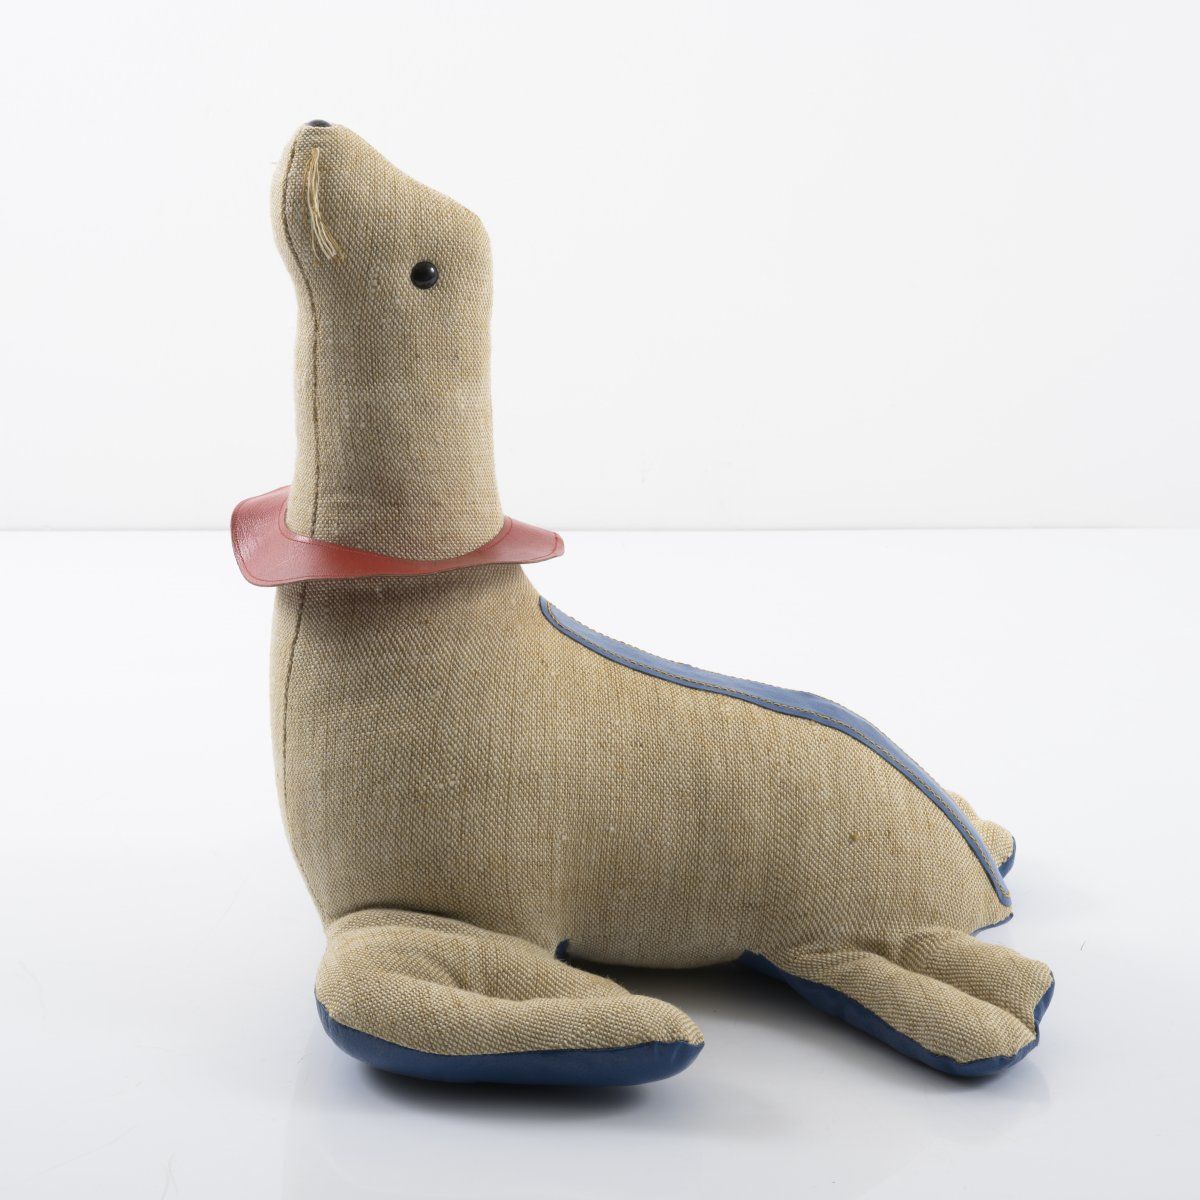 Null Renate Müller, Seal, 1971, H. 58 x 50 x 56 cm. Made by Renate Müller, Sonne&hellip;